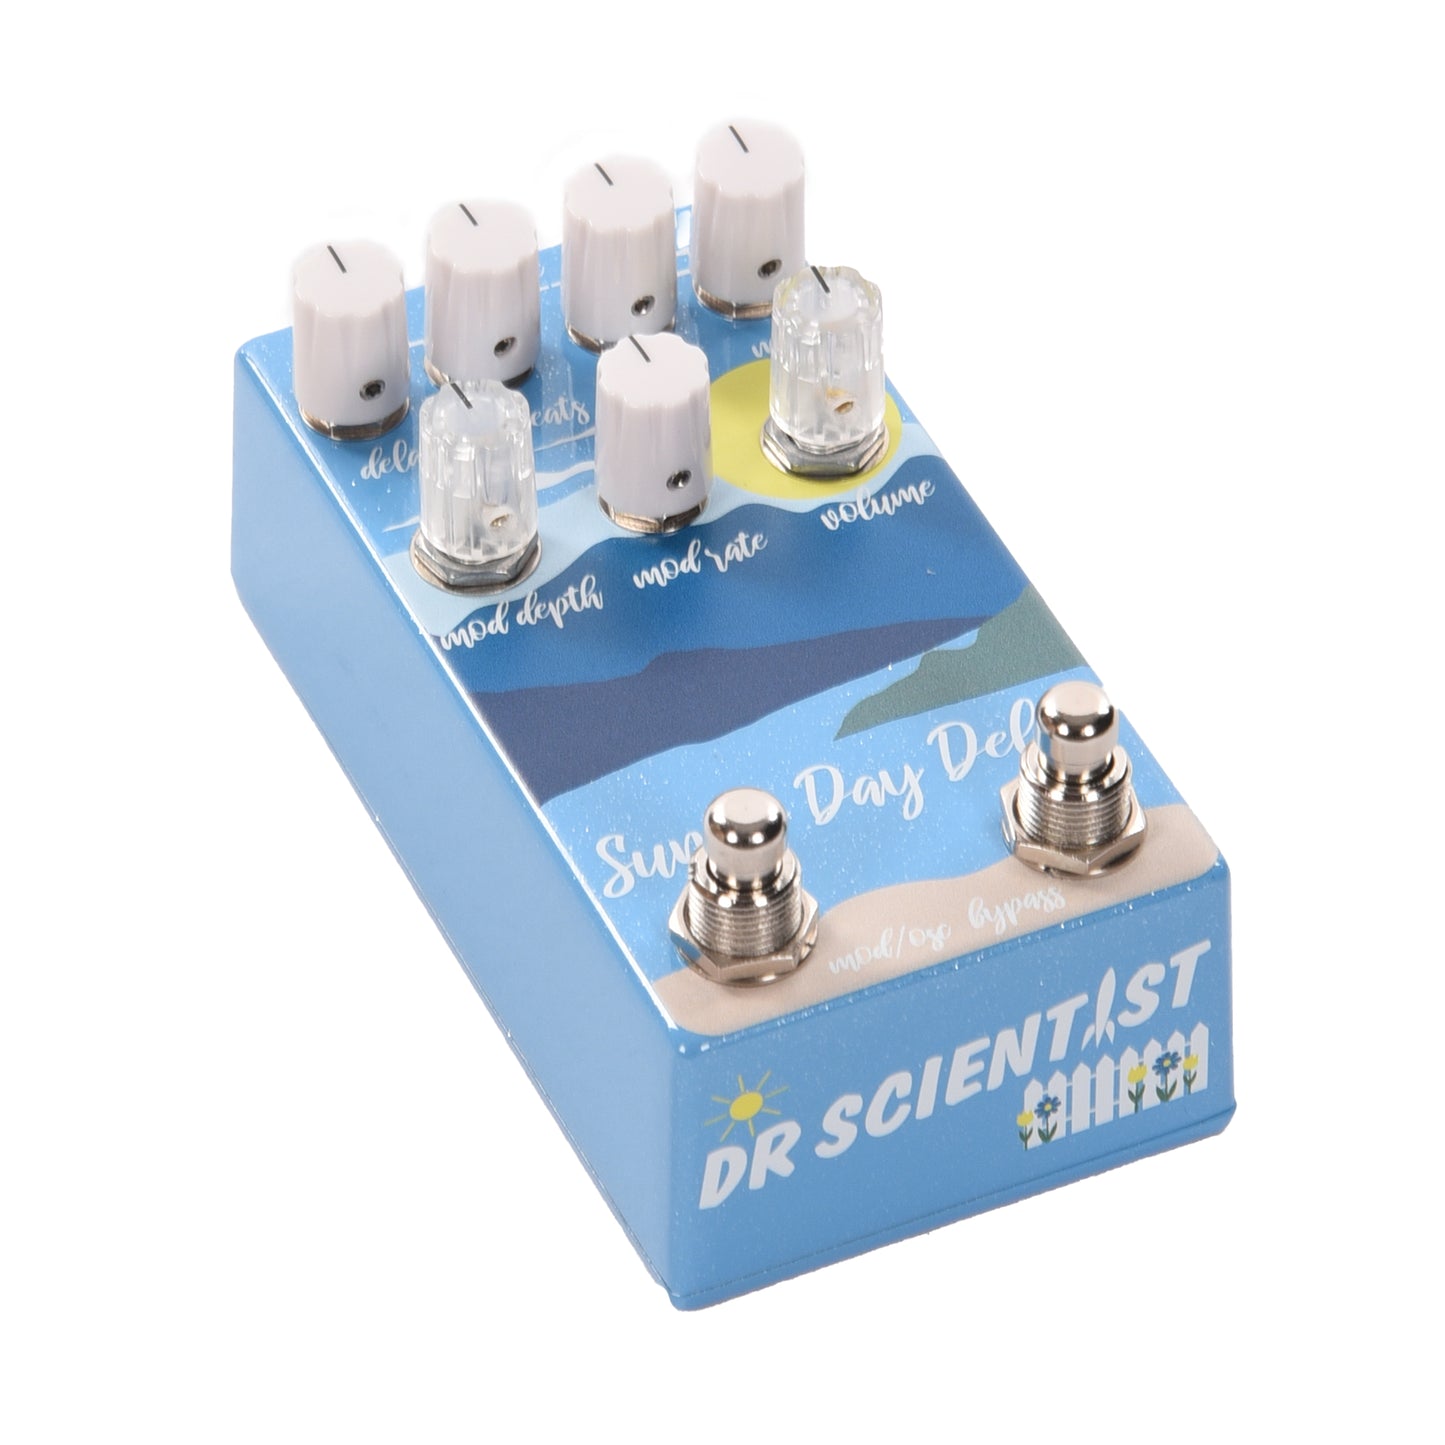 Dr. Scientist Sunny Day Delay Pedal